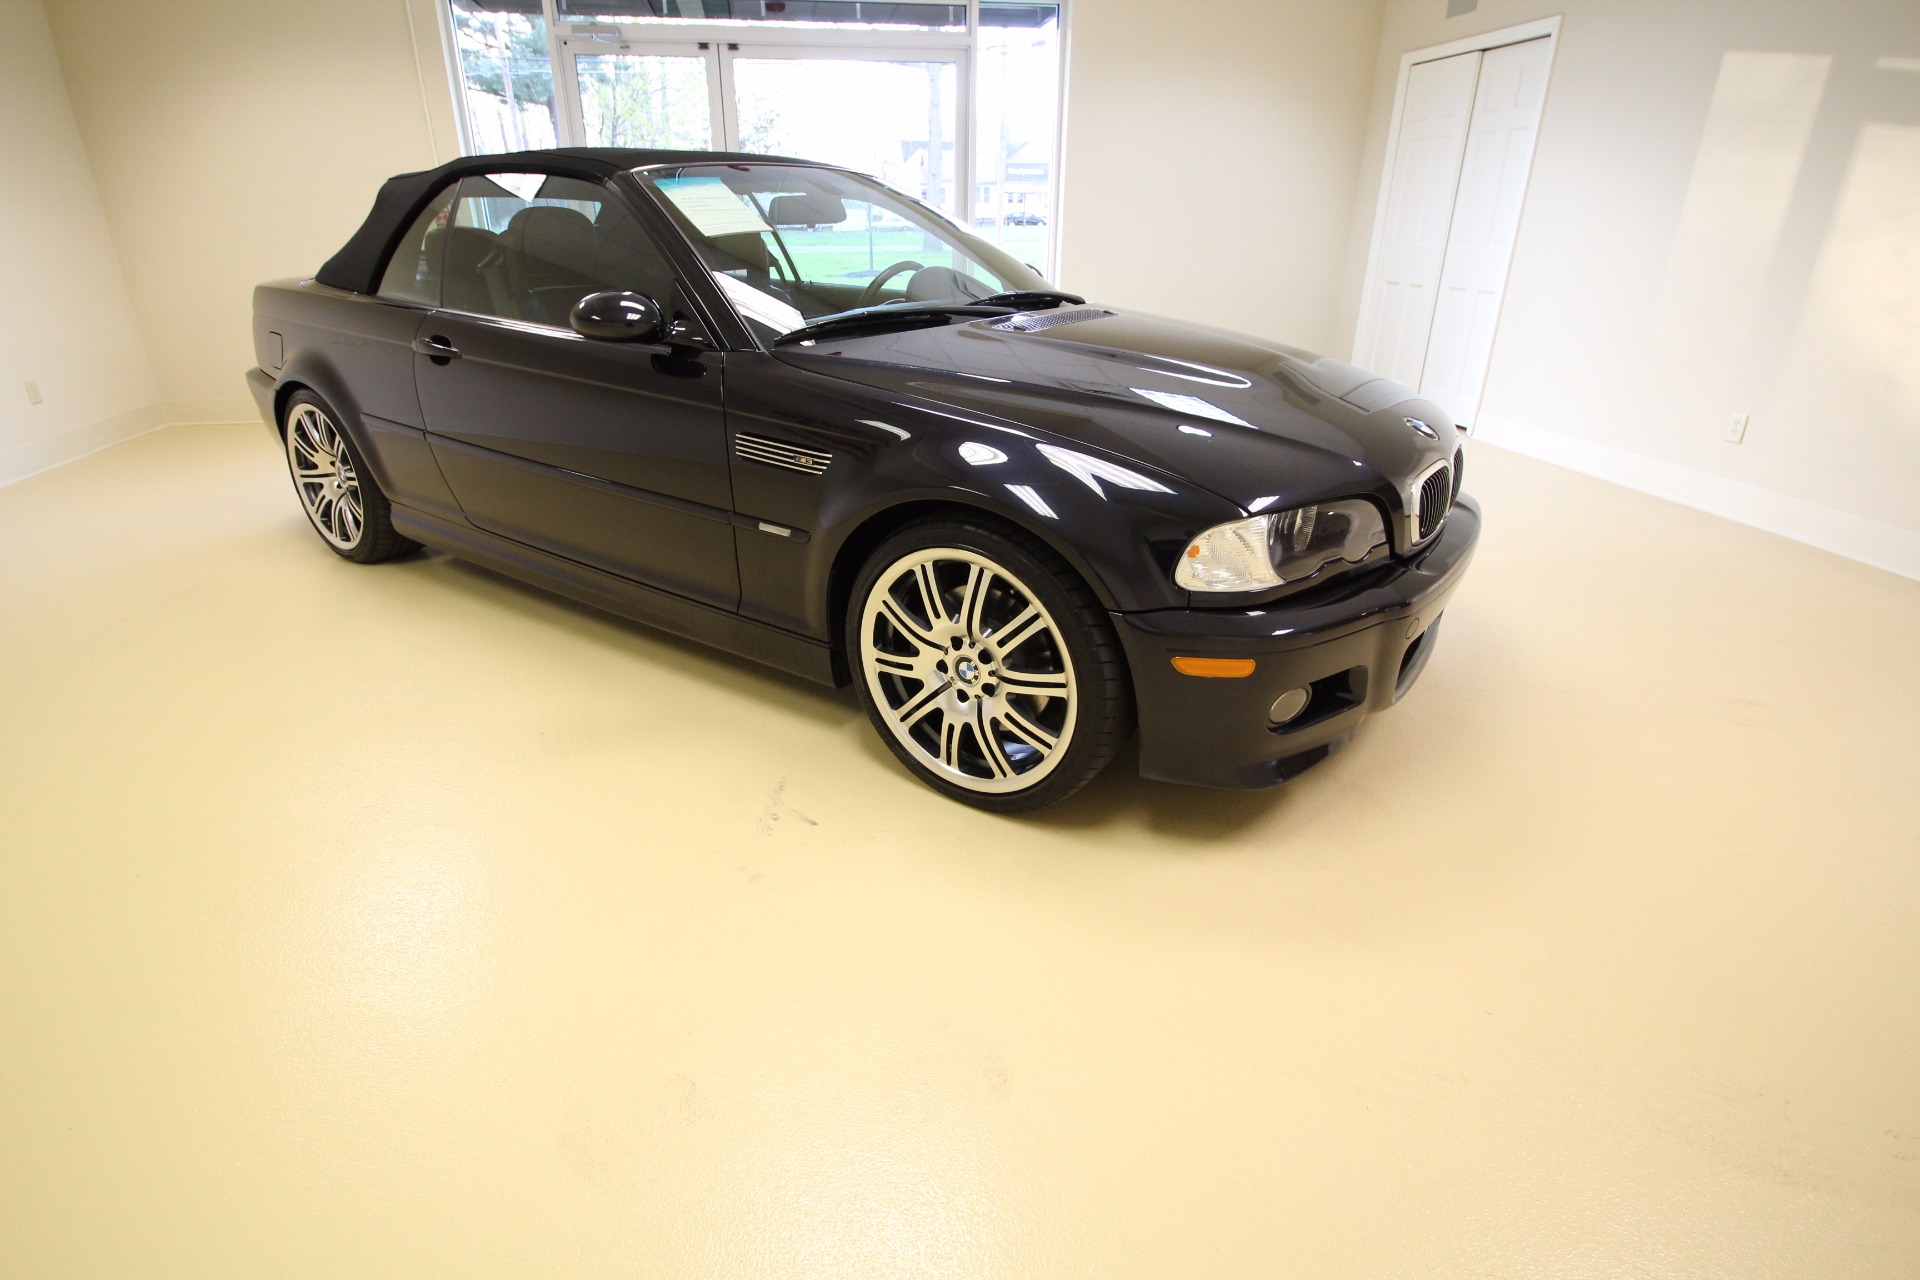 Used 2005 Carbon Black Metallic with Body Color Hard Top BMW M3 Convertible | Albany, NY